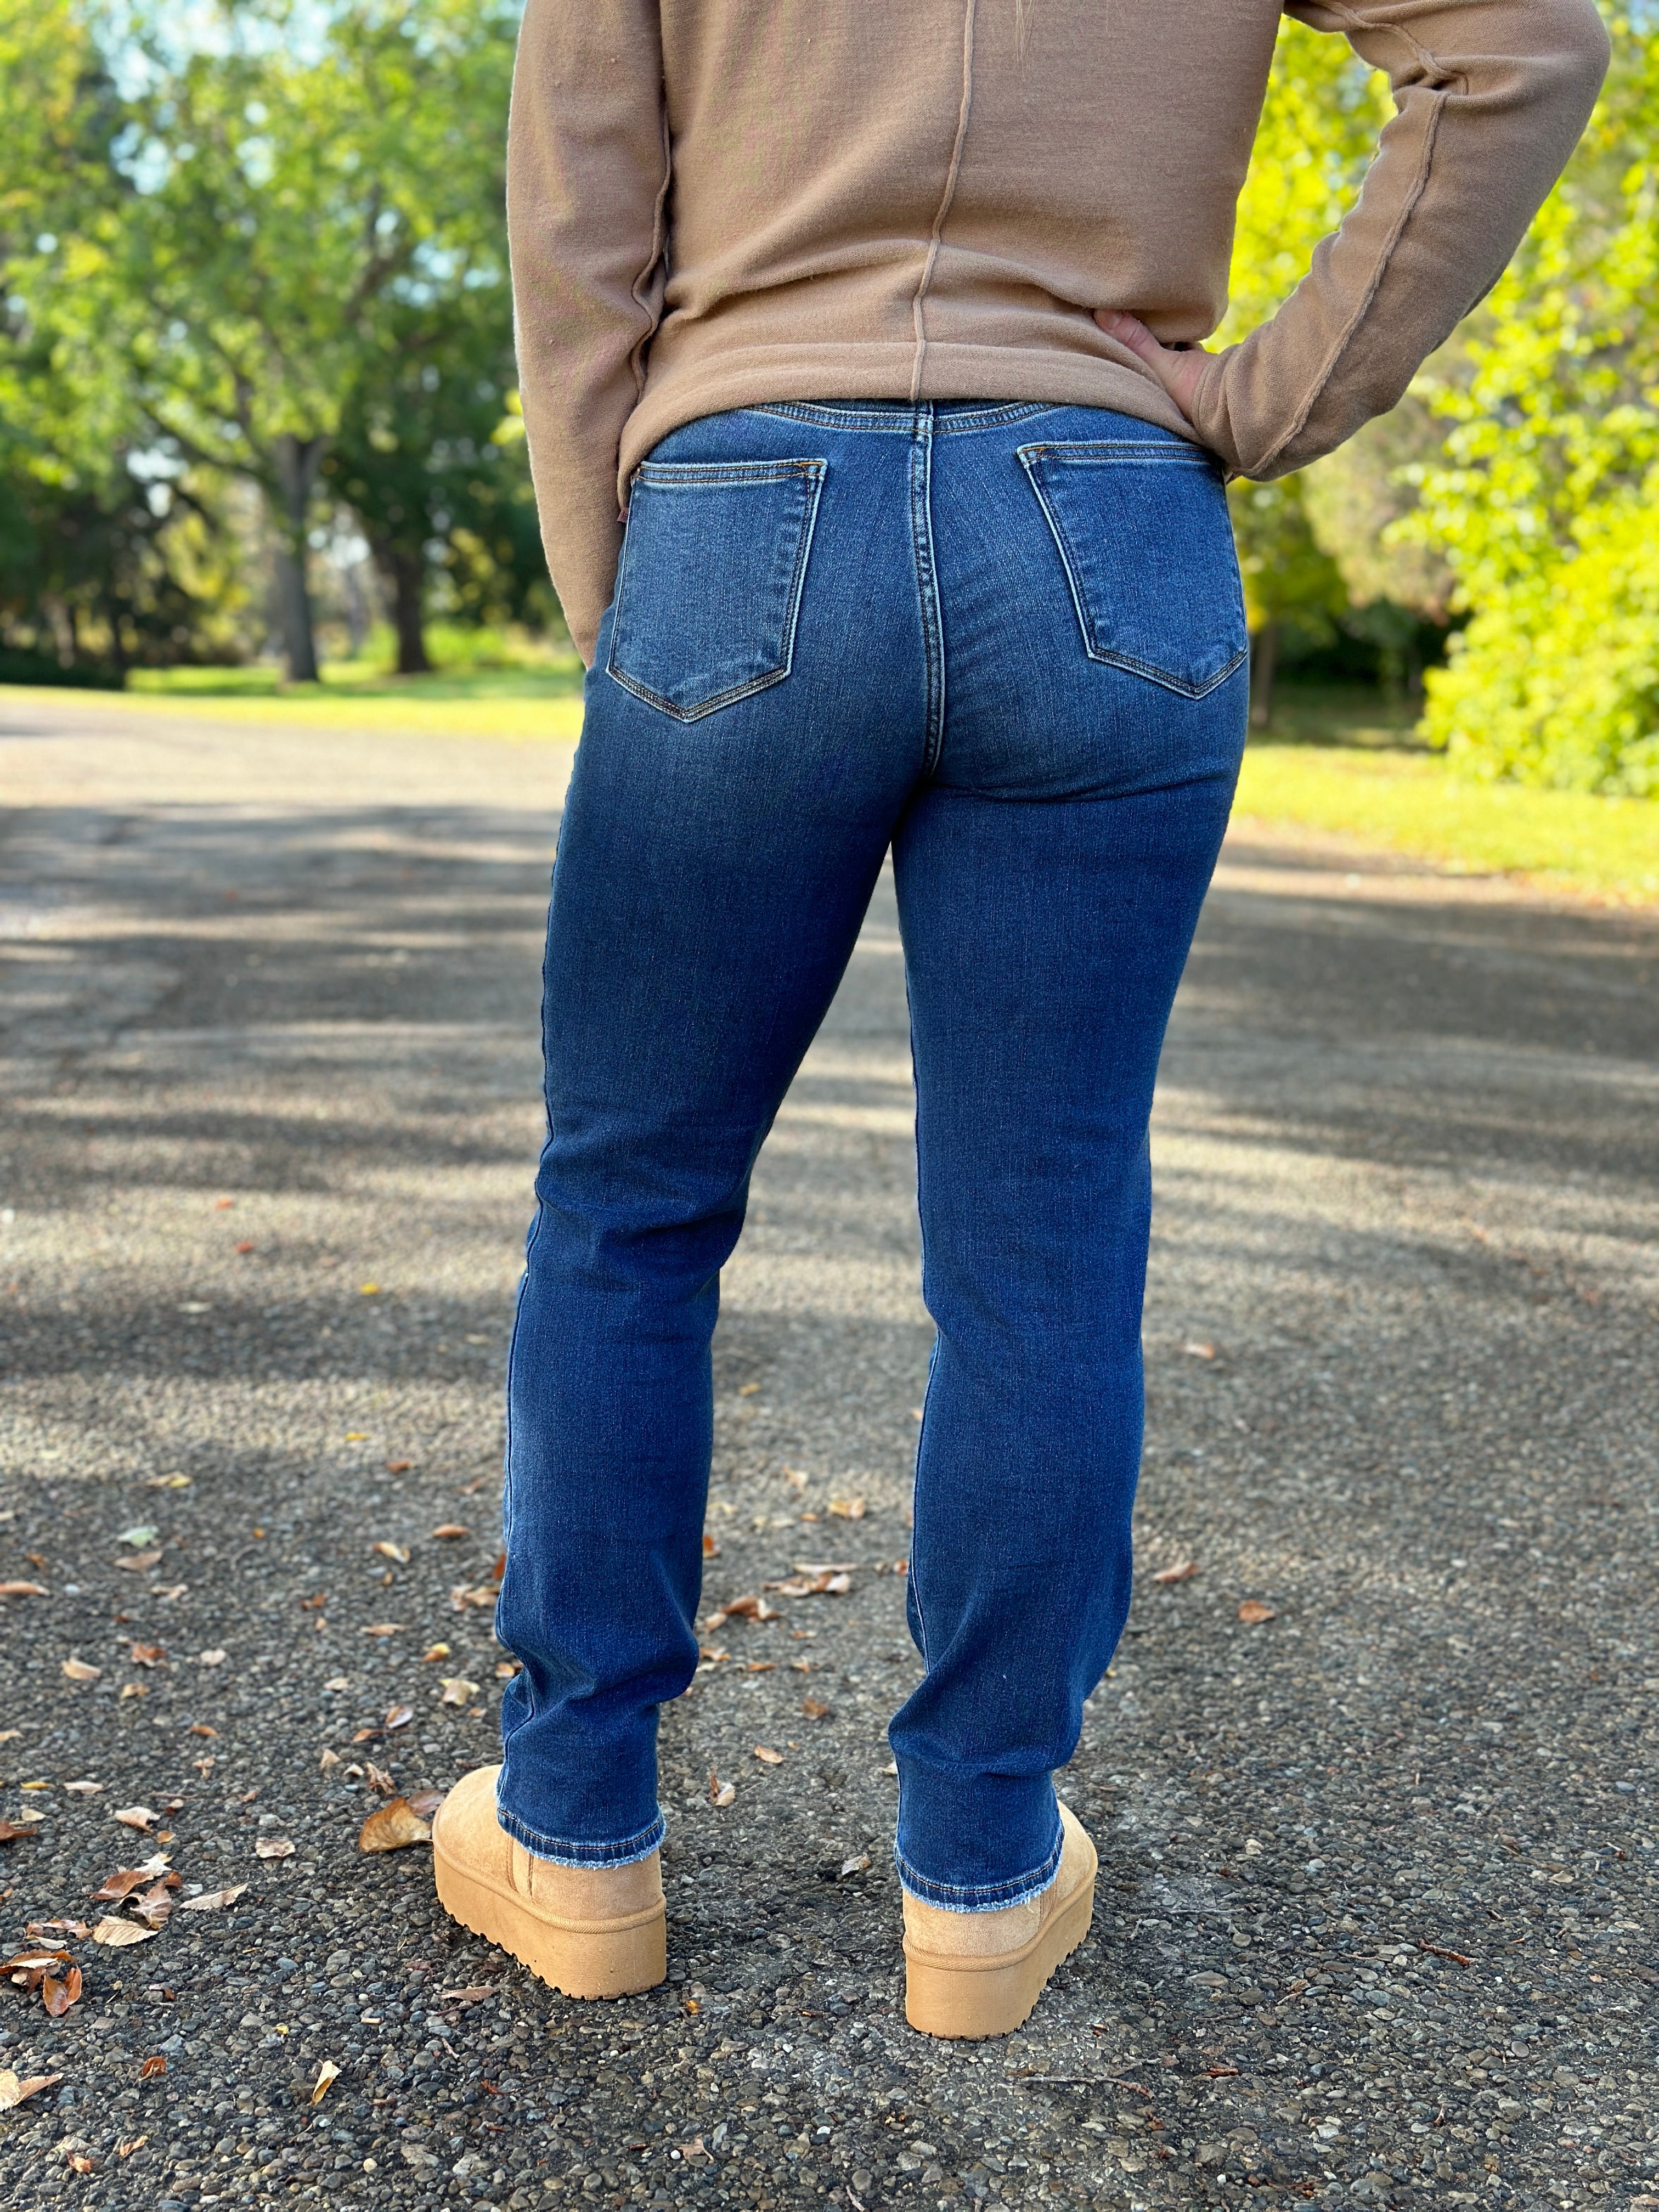 Judy Blue Straight Fit Thermal Jean (sizes 24-24W) - FINAL SALE - The Pink  Porcupine ltd.